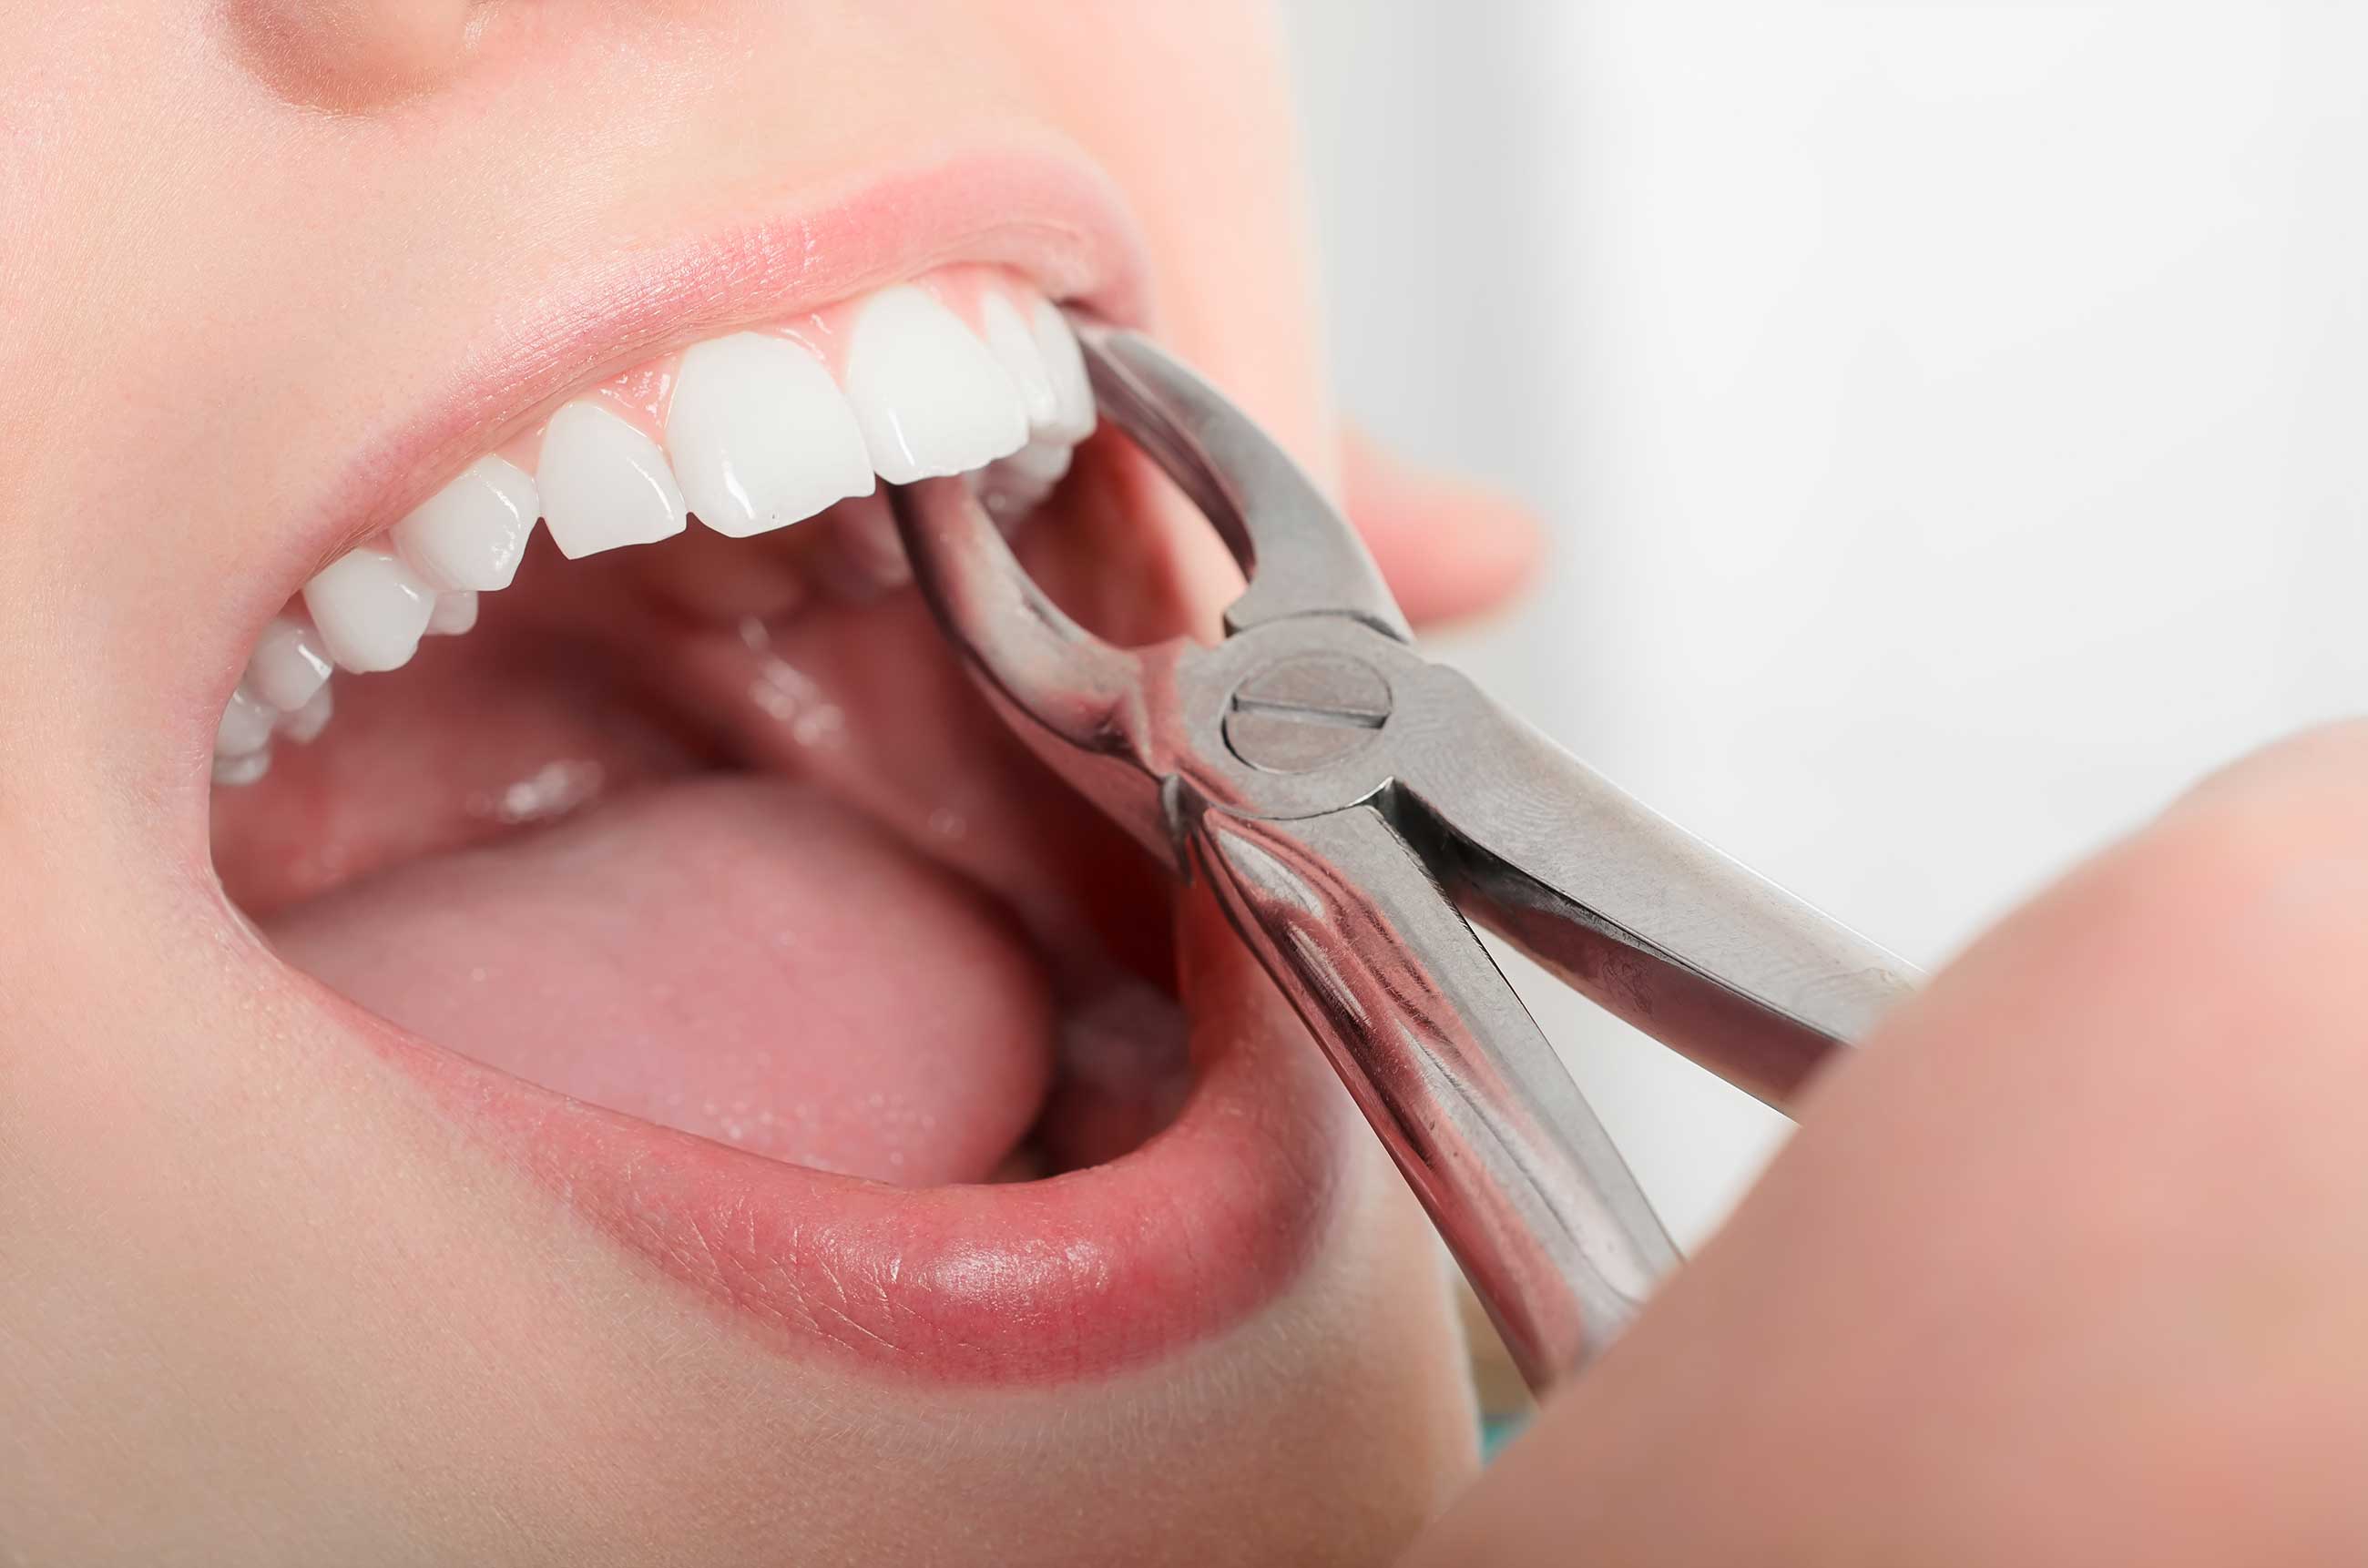 How Should You Eat After Tooth Extraction? What Should You Pay Attention to in General?